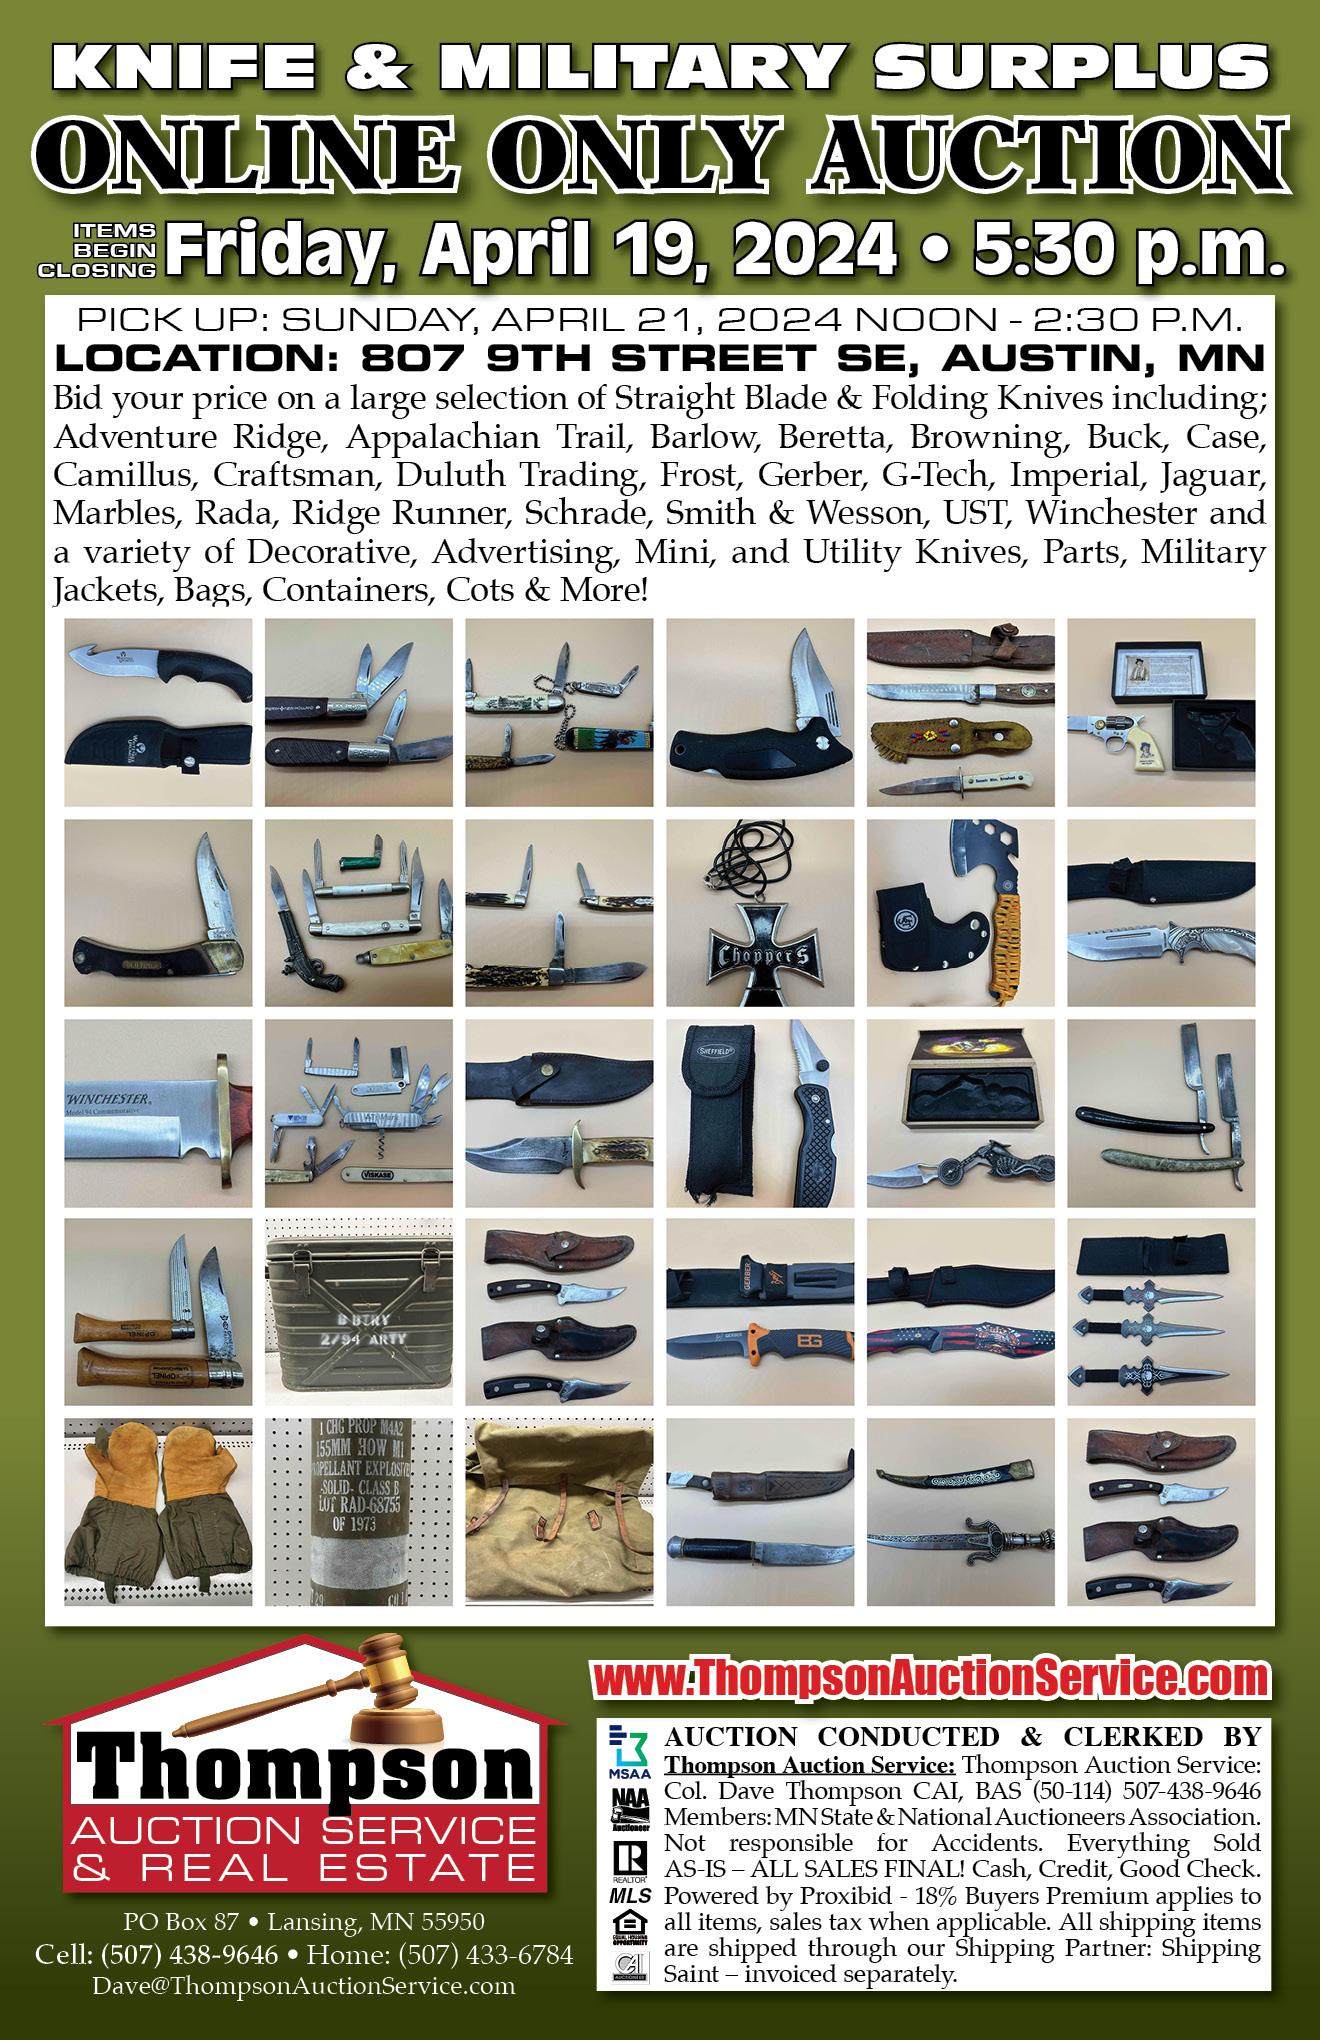 KNIVES & MILITARY SURPLUS ONLINE ONLY AUCTION